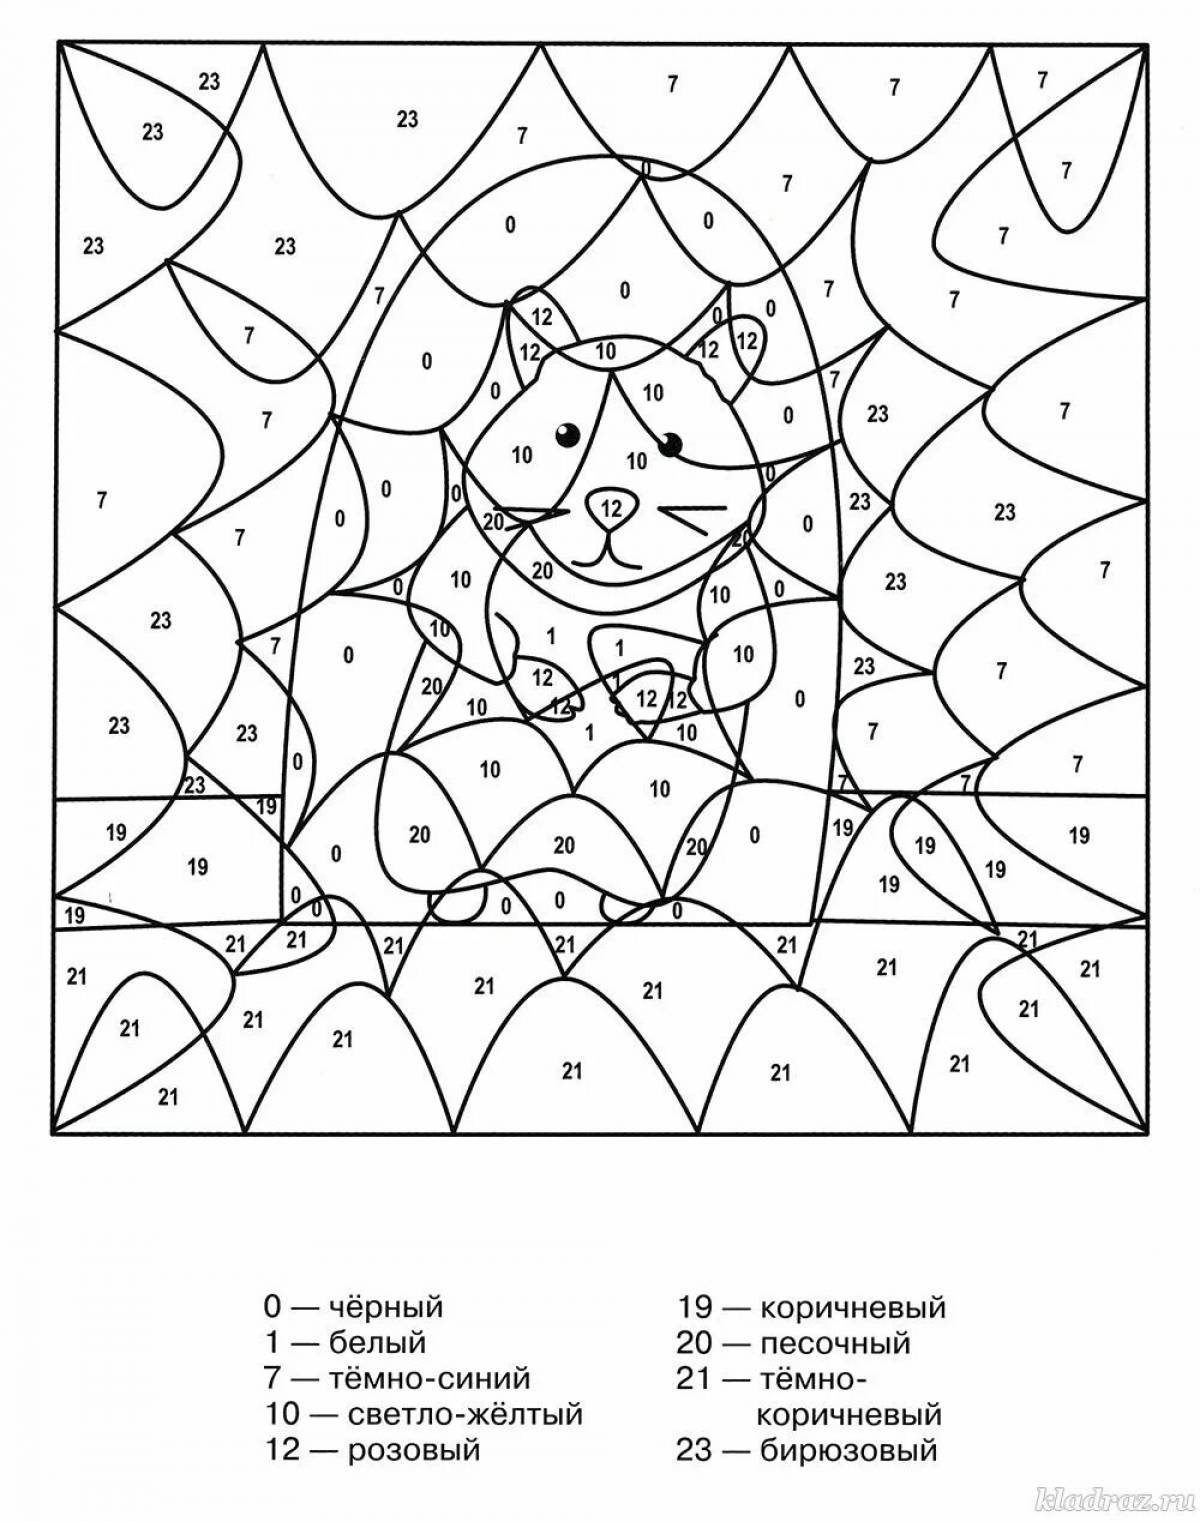 Colorful bear by numbers coloring book